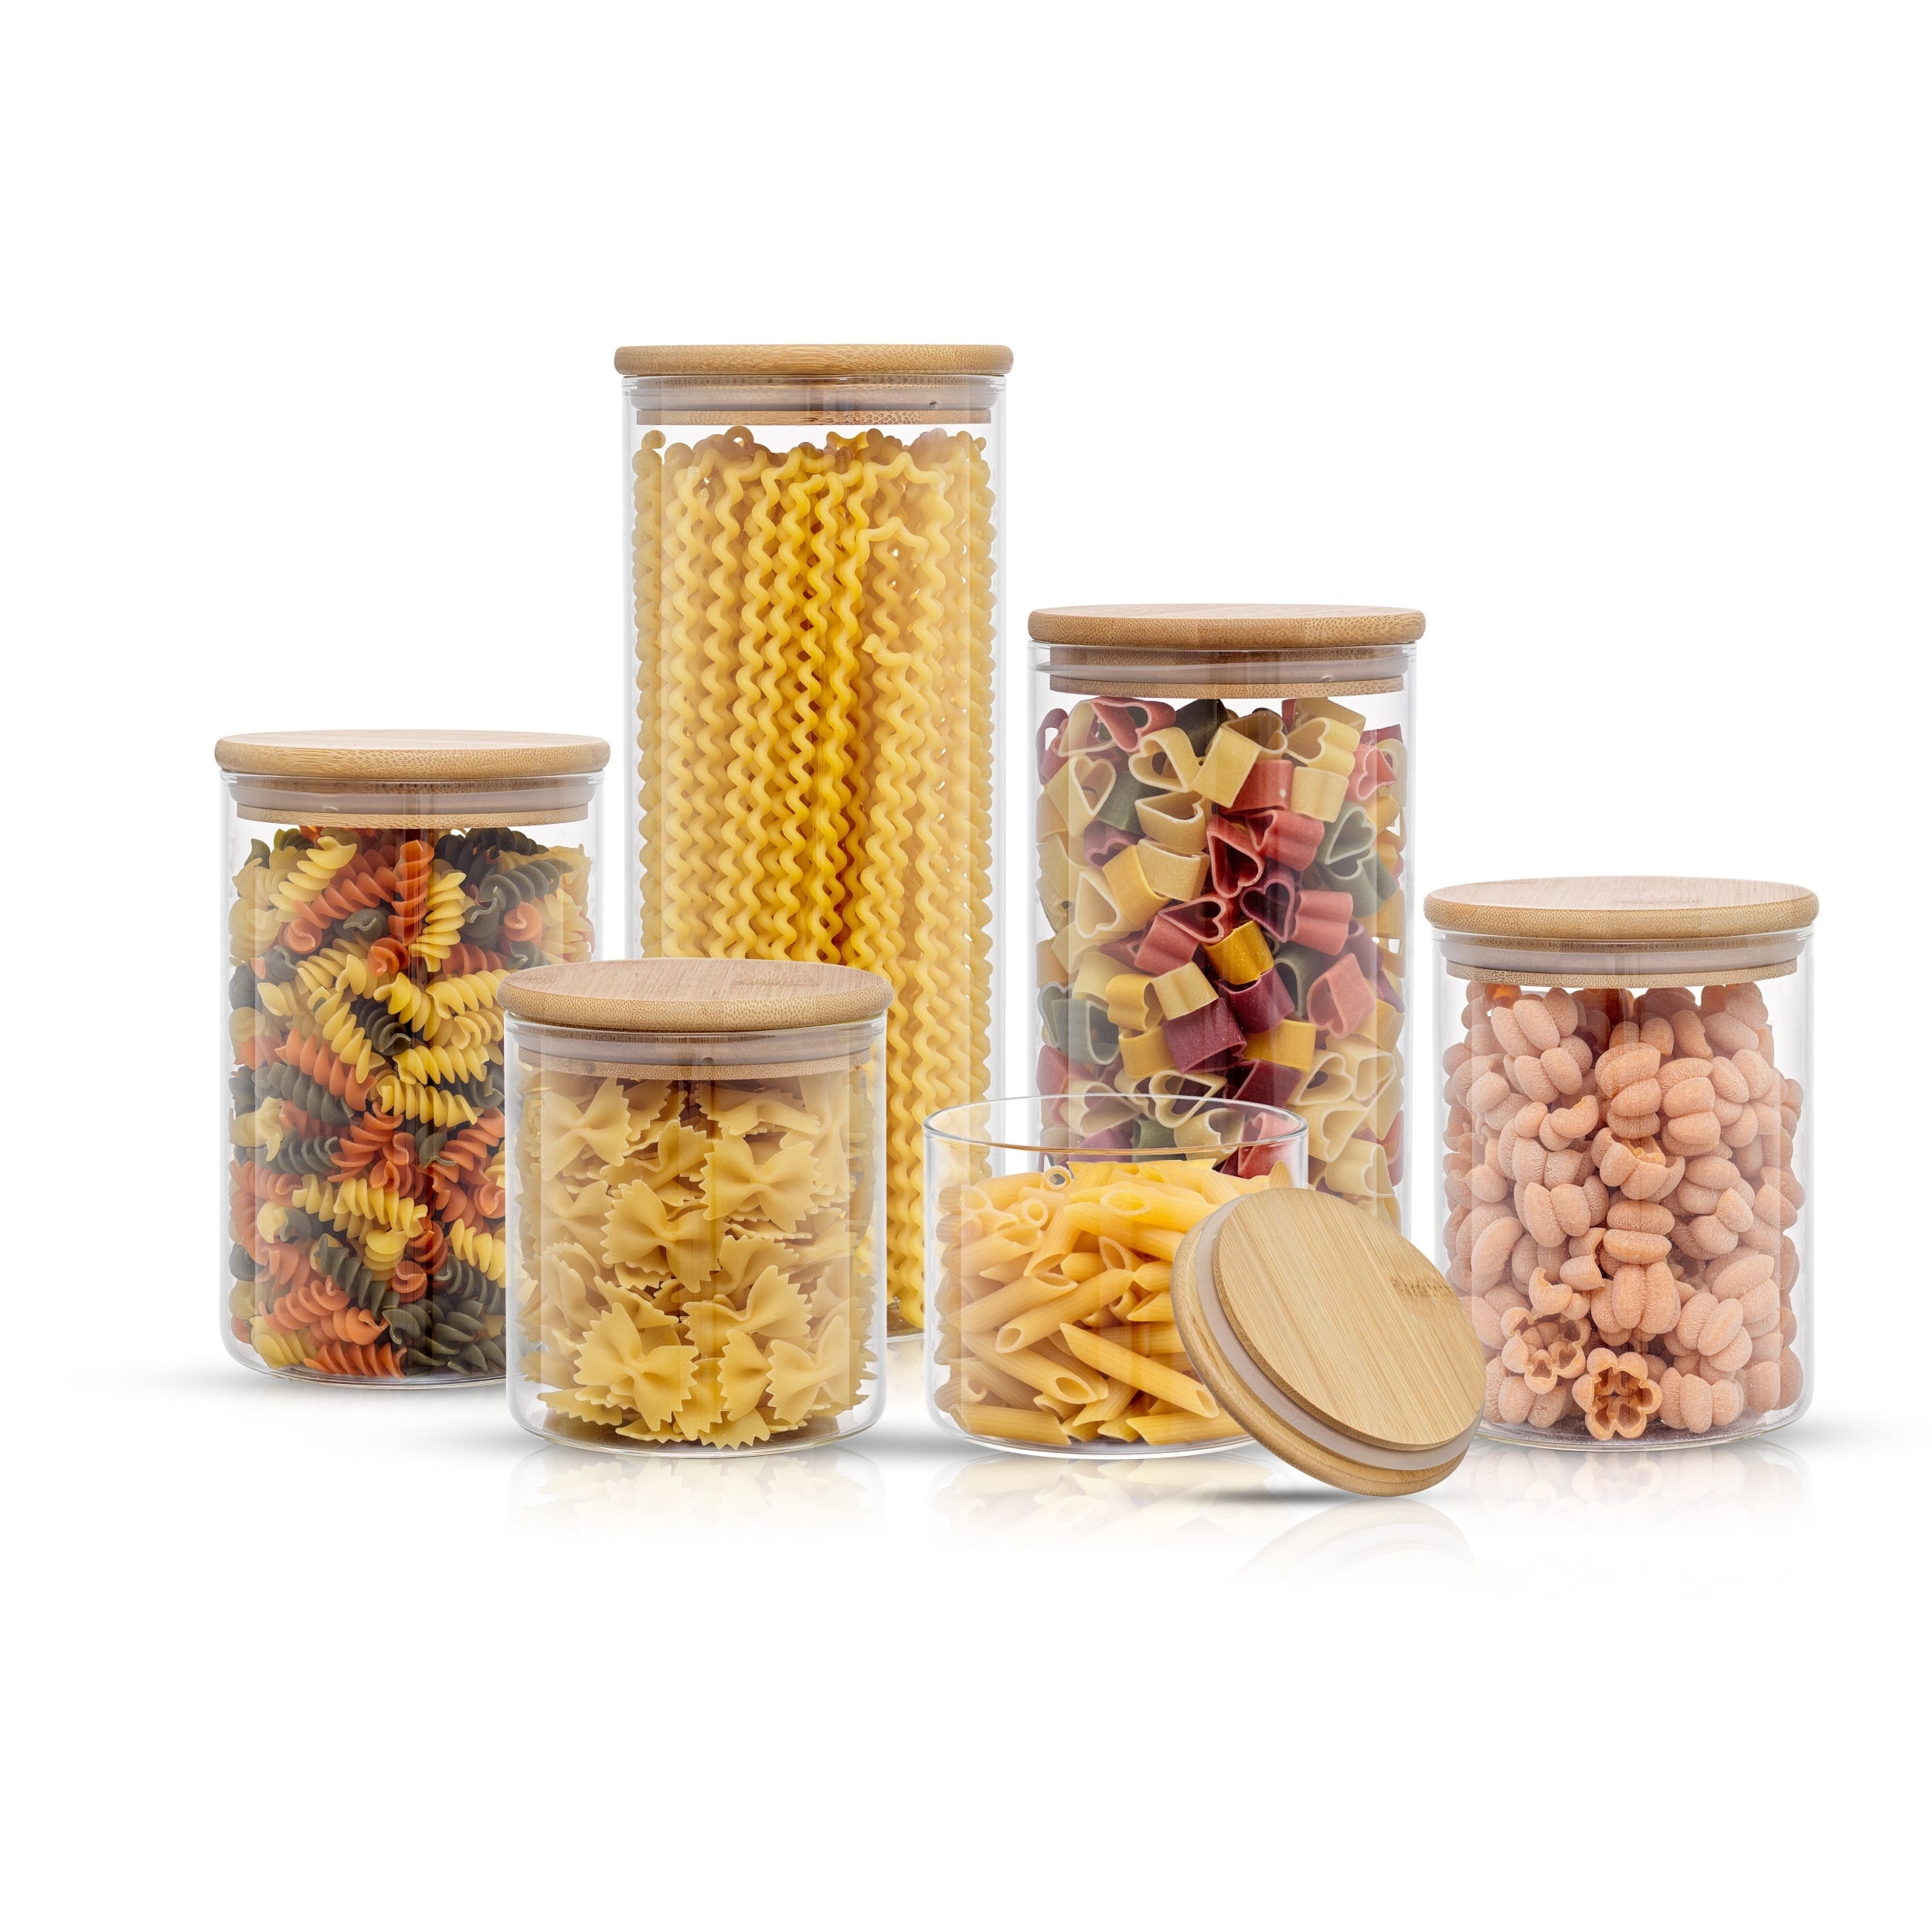 https://ak1.ostkcdn.com/images/products/is/images/direct/d5c2a1683886ffb27969788c6abfa2d6eb8b773c/JoyJolt-Kitchen-Canister-Glass-Jars-Food-Storage-Containers-with-Airtight-Lids-Set-of-6.jpg